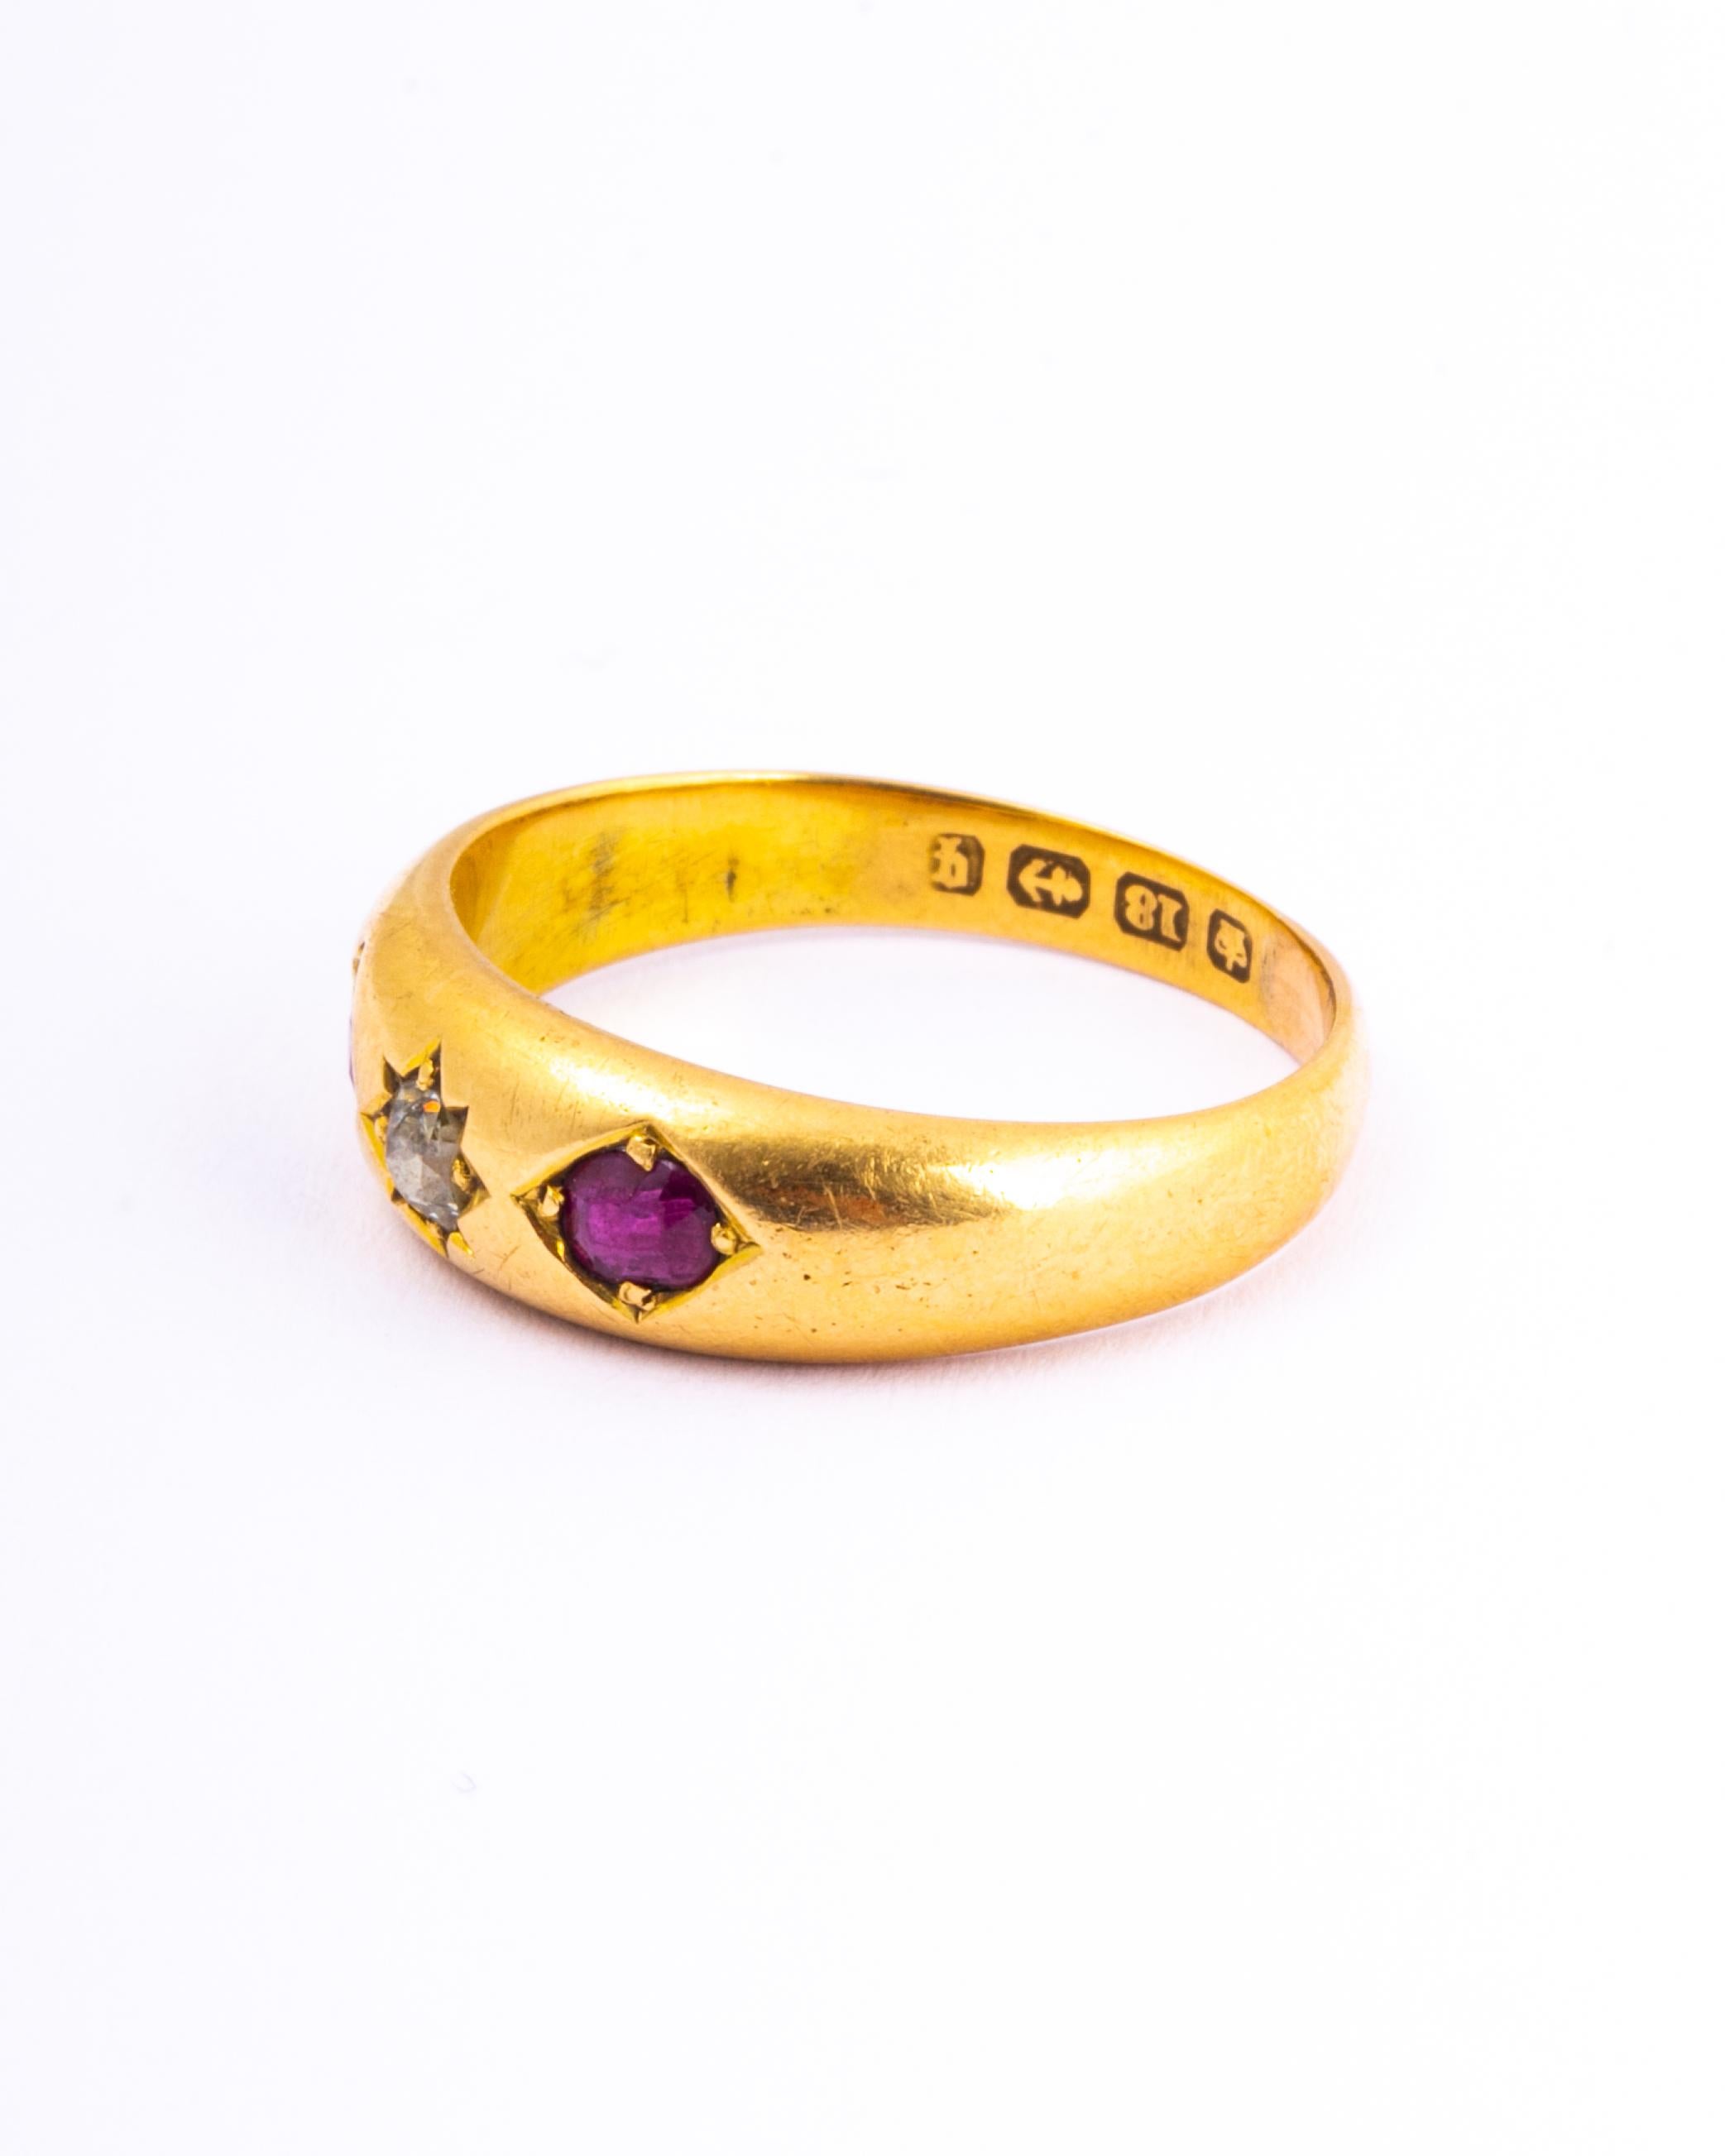 The central diamond in this glossy 18ct gold band measures 10pts and is set in a star setting. The rubies that sit either side of this stone measure 15pts and are held in flush claw settings. 

Ring Size: Q or 8 1/4
Band Width: 6mm 

Weight: 3.7g 